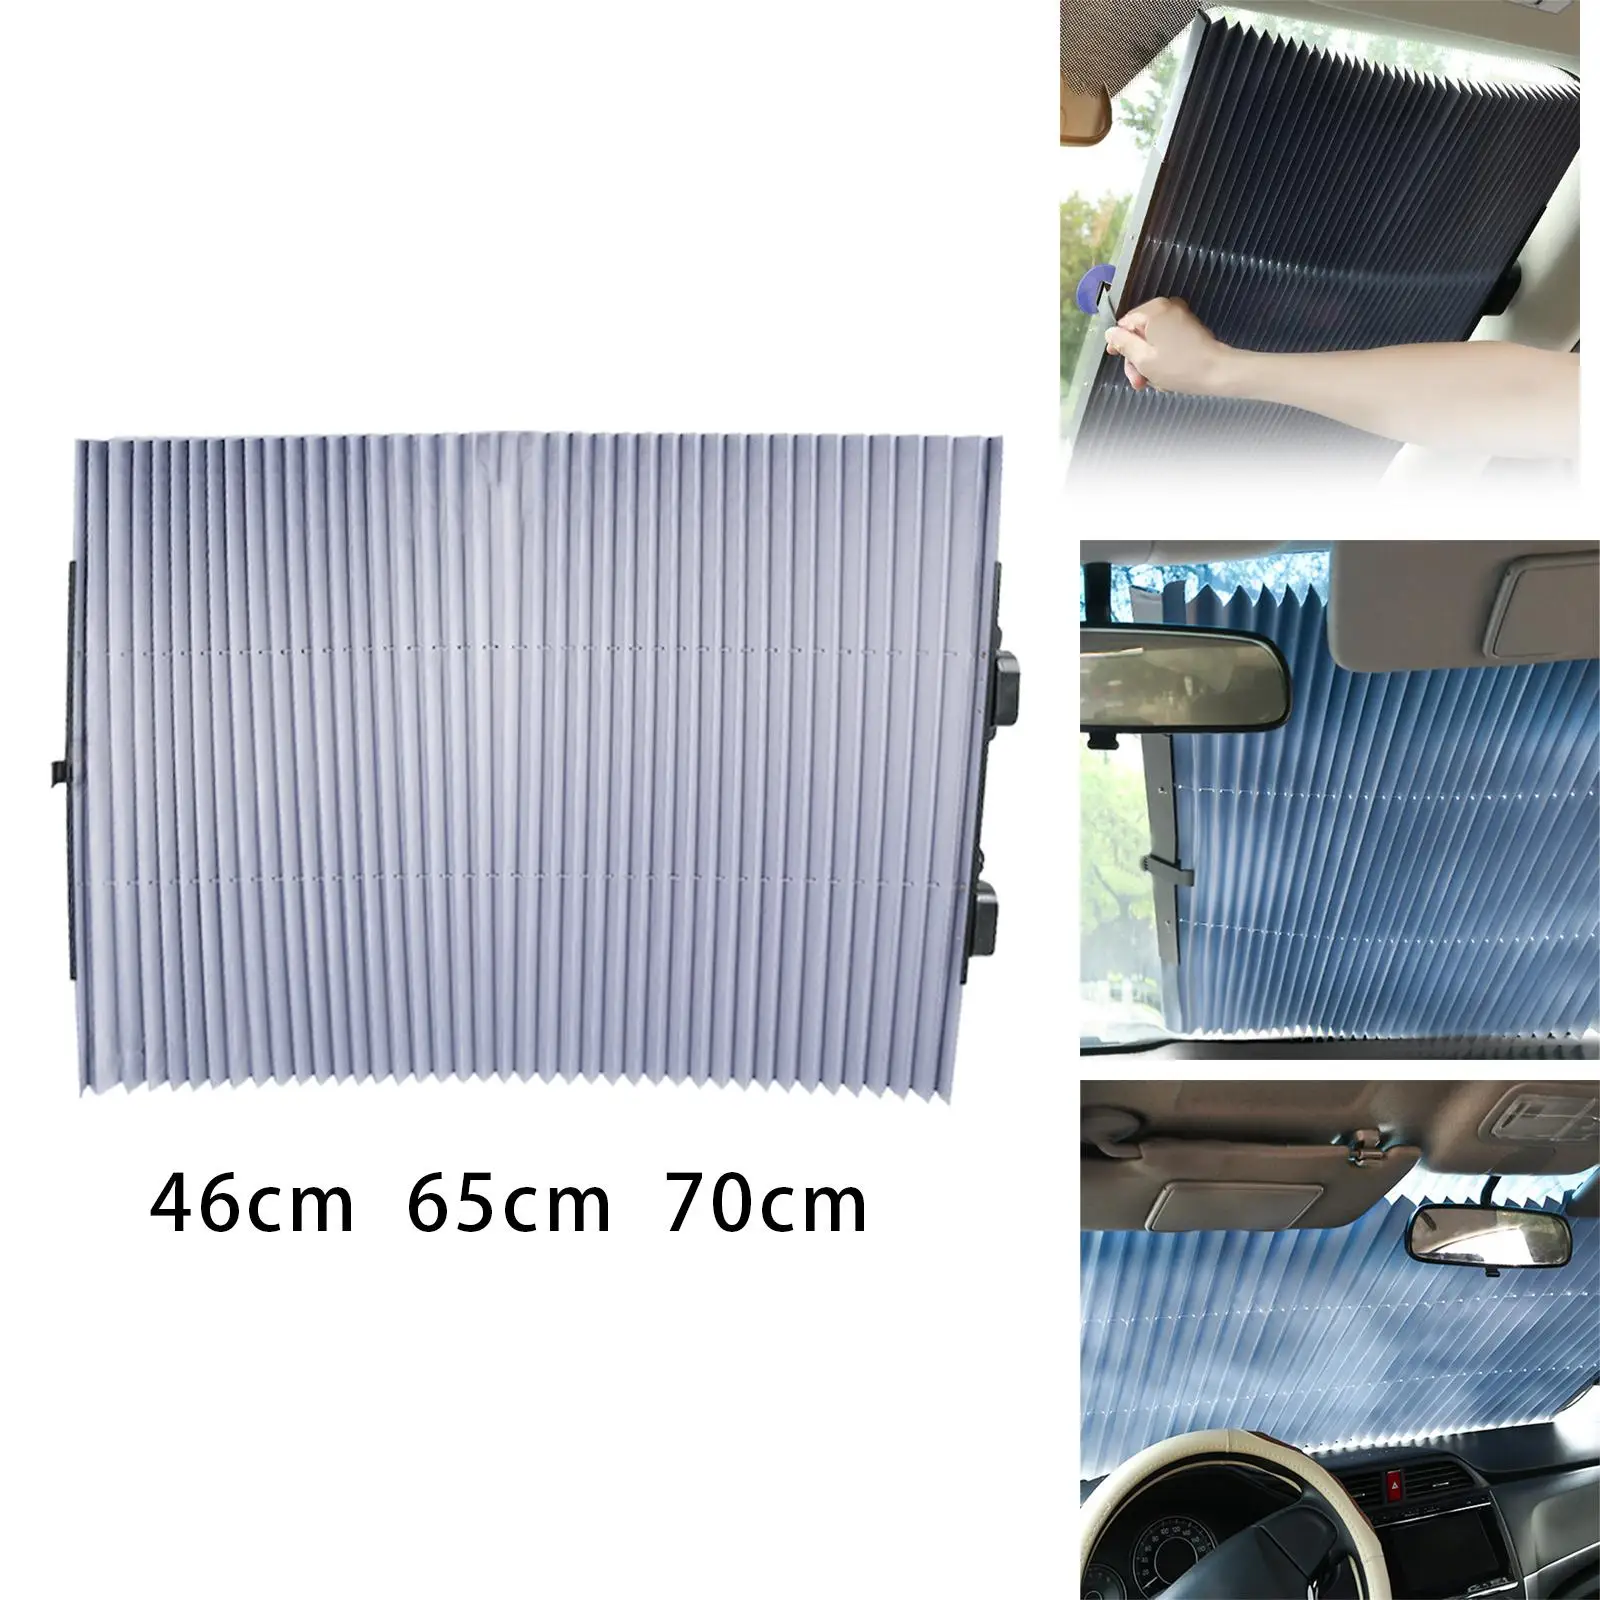 Windshield Sunshade Aluminum Foil Car Styling Accessories Sun Visor Protector Car Sun Shades Fit for All Cars Heat and Sunlight